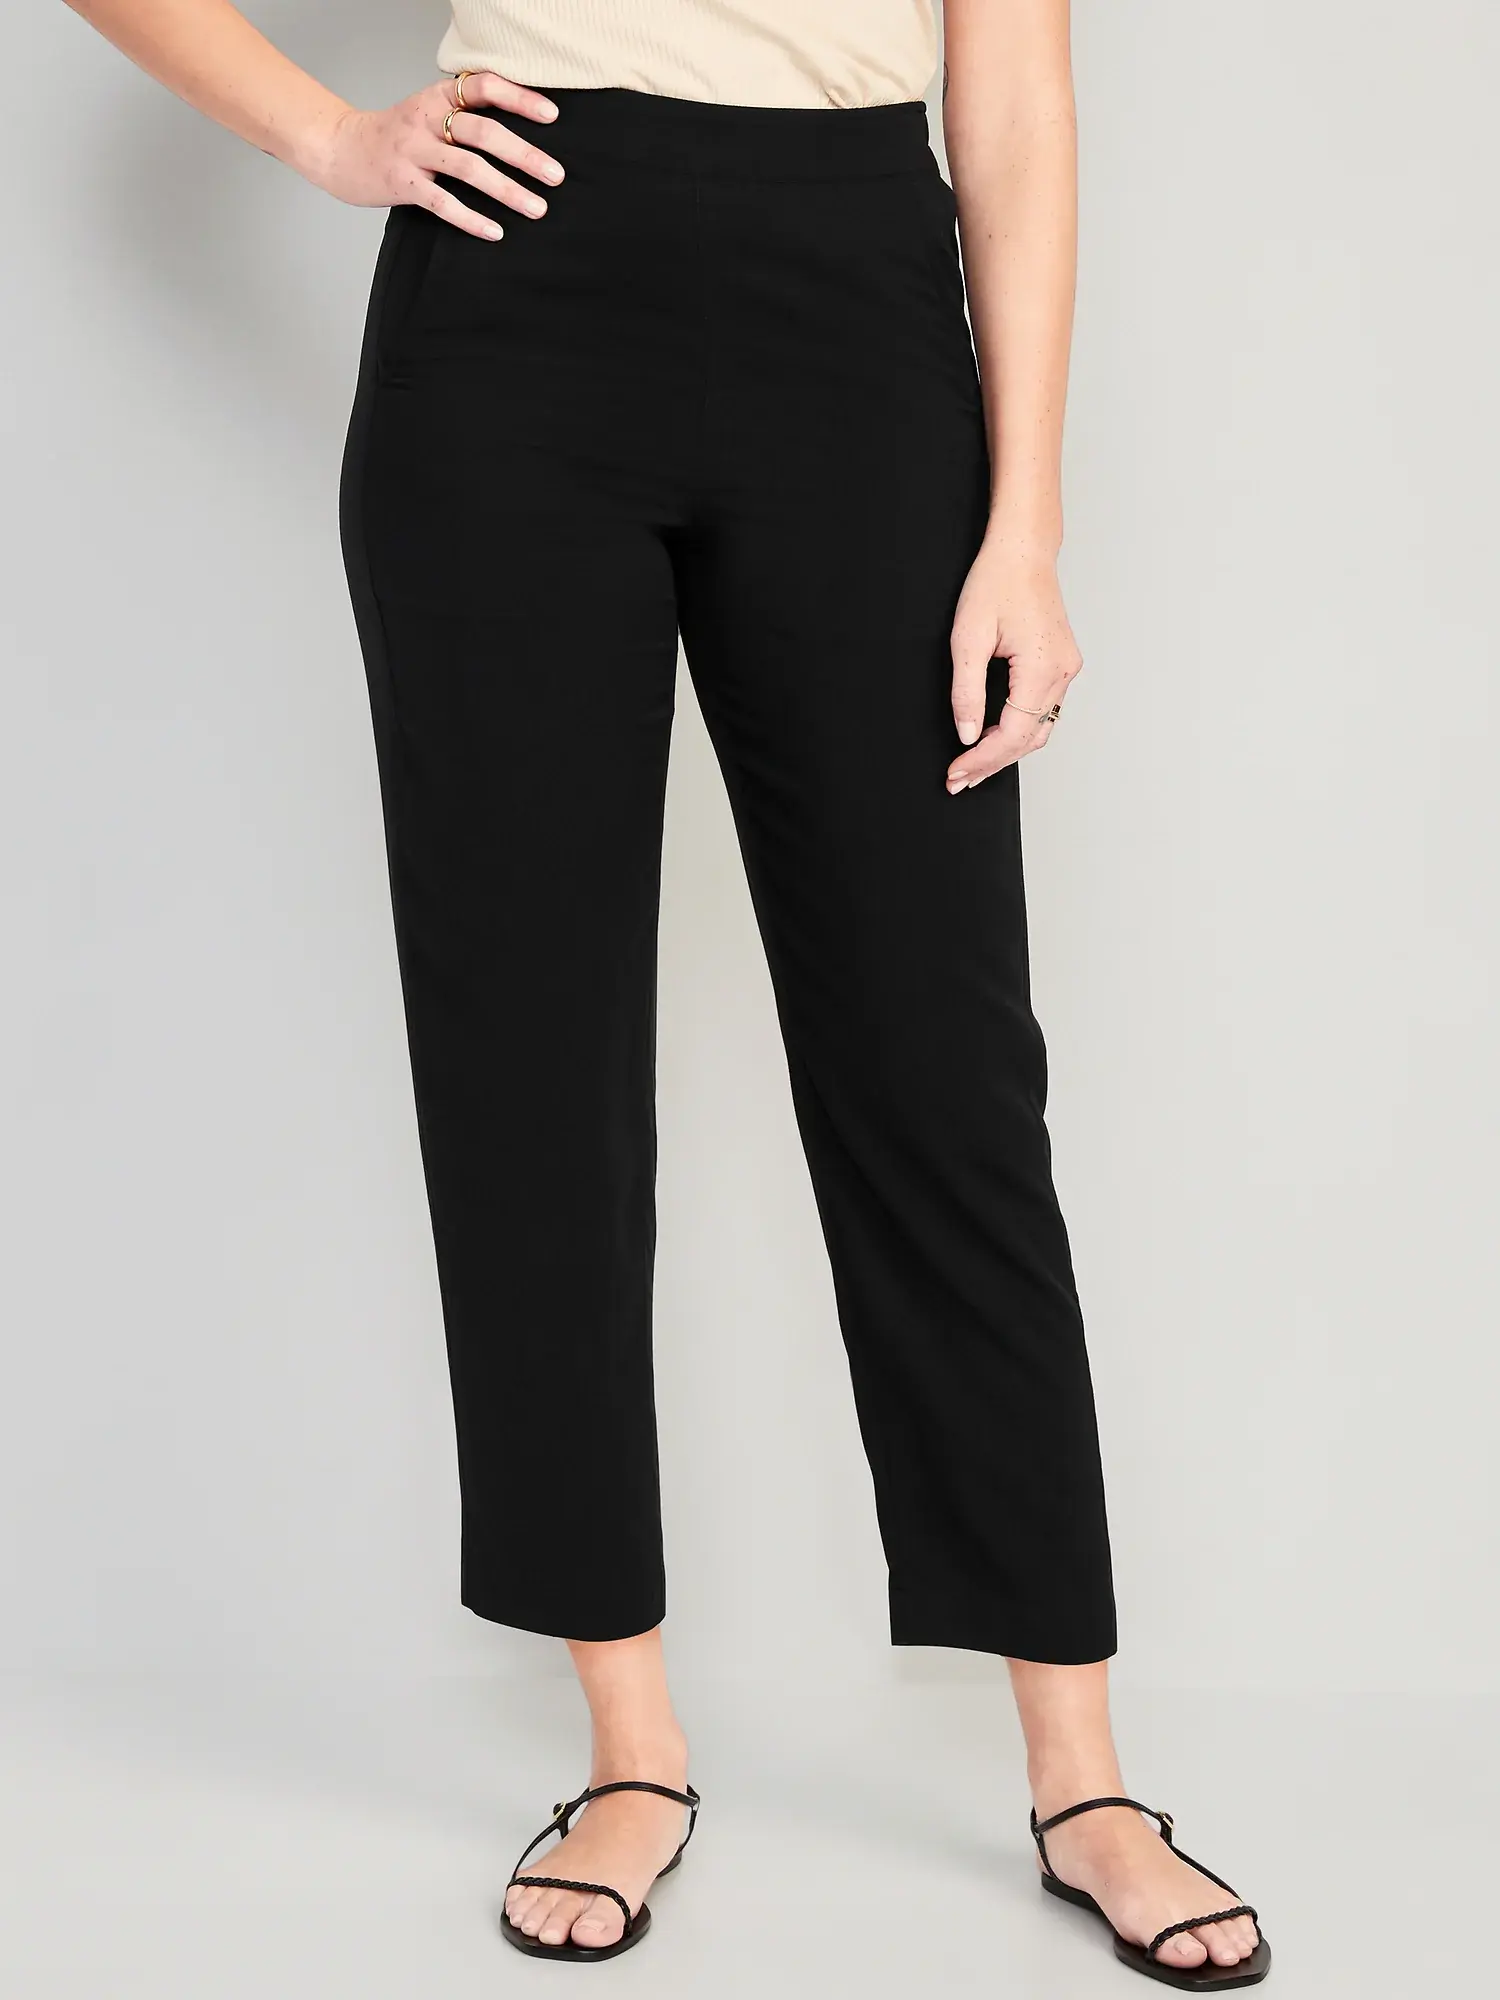 Old Navy High-Waisted Playa Taper Pants for Women black. 1